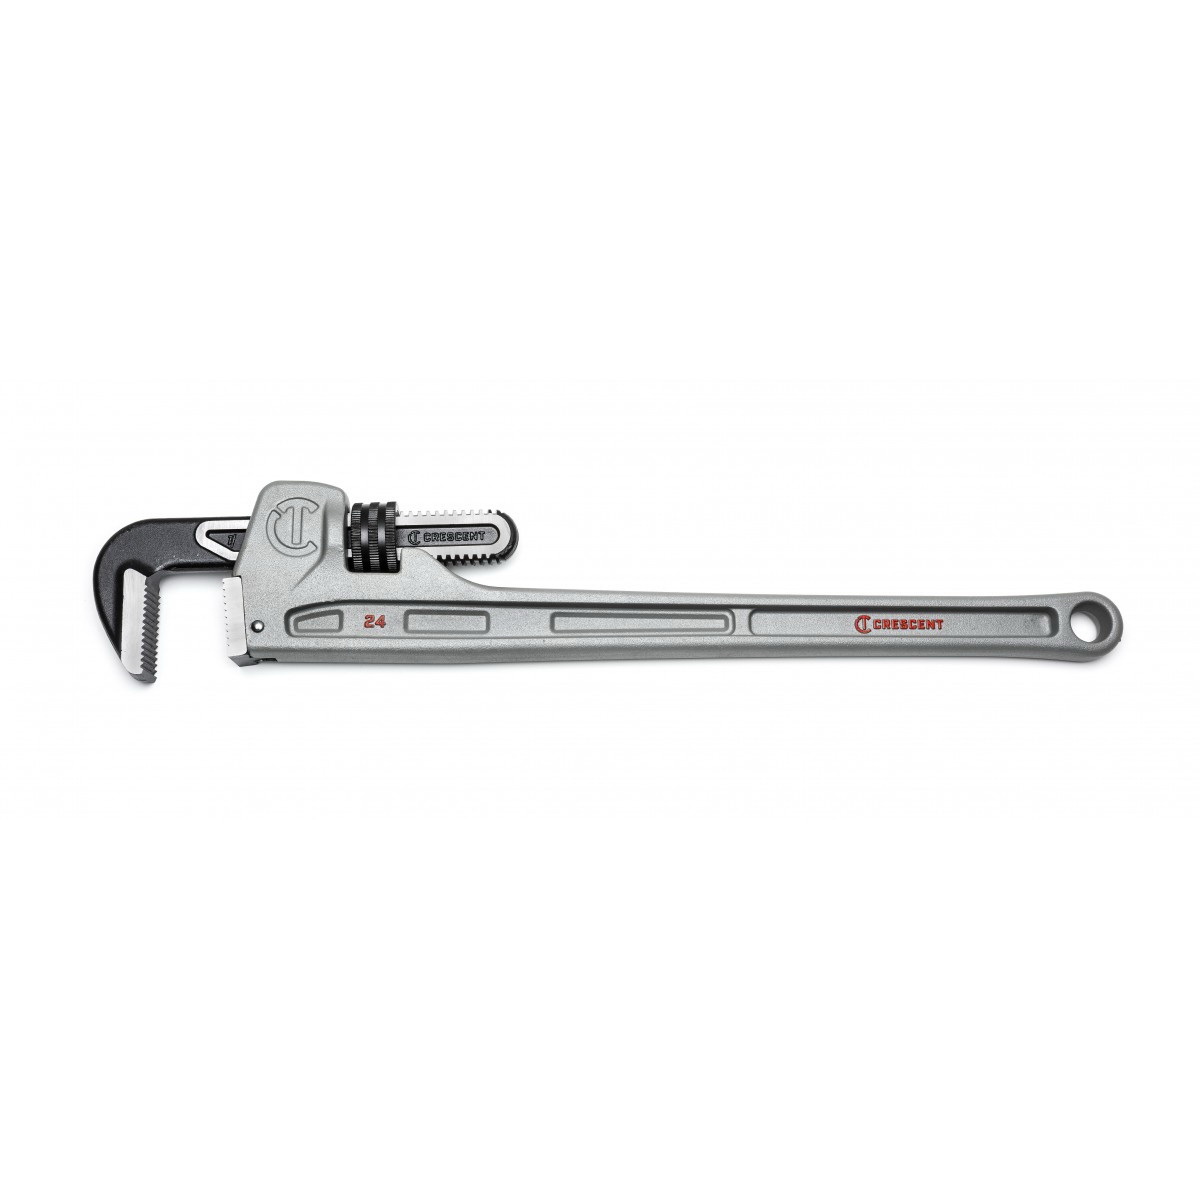 CAPW24 Pipe Wrench, 0 to 3-1/2 in Jaw, 24 in L, Aluminum, Powder-Coated